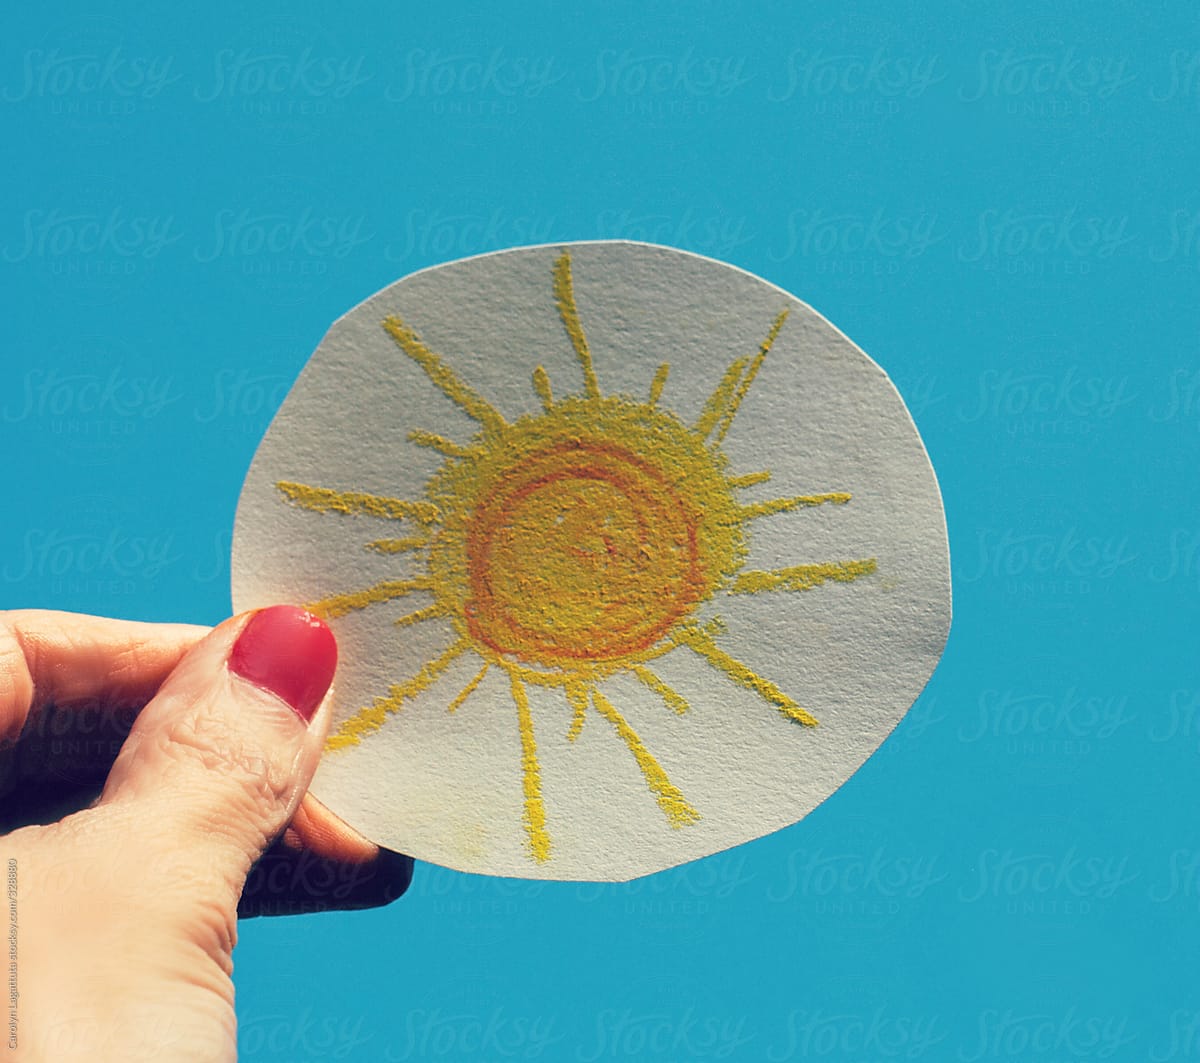 Female holding a drawing of a sun up to the blue sky